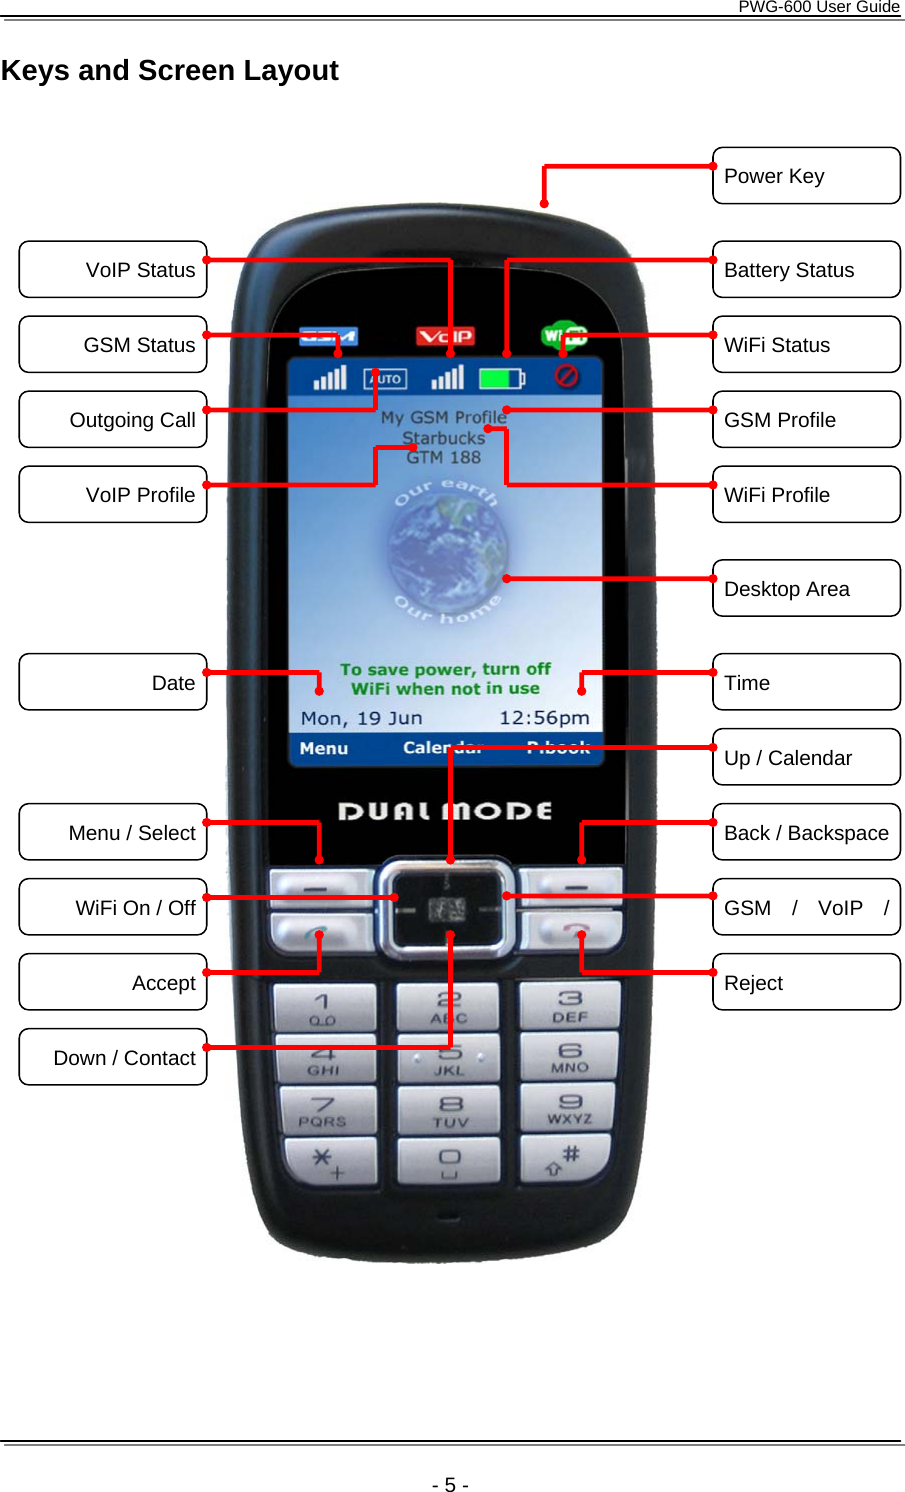      PWG-600 User Guide    - 5 - Keys and Screen Layout                                   Reject GSM / VoIP / Back / BackspaceUp / Calendar Time DateMenu / SelectWiFi On / OffAcceptDown / ContactDesktop Area VoIP ProfileOutgoing Call GSM StatusVoIP Status Battery Status WiFi Status GSM Profile WiFi Profile Power Key 